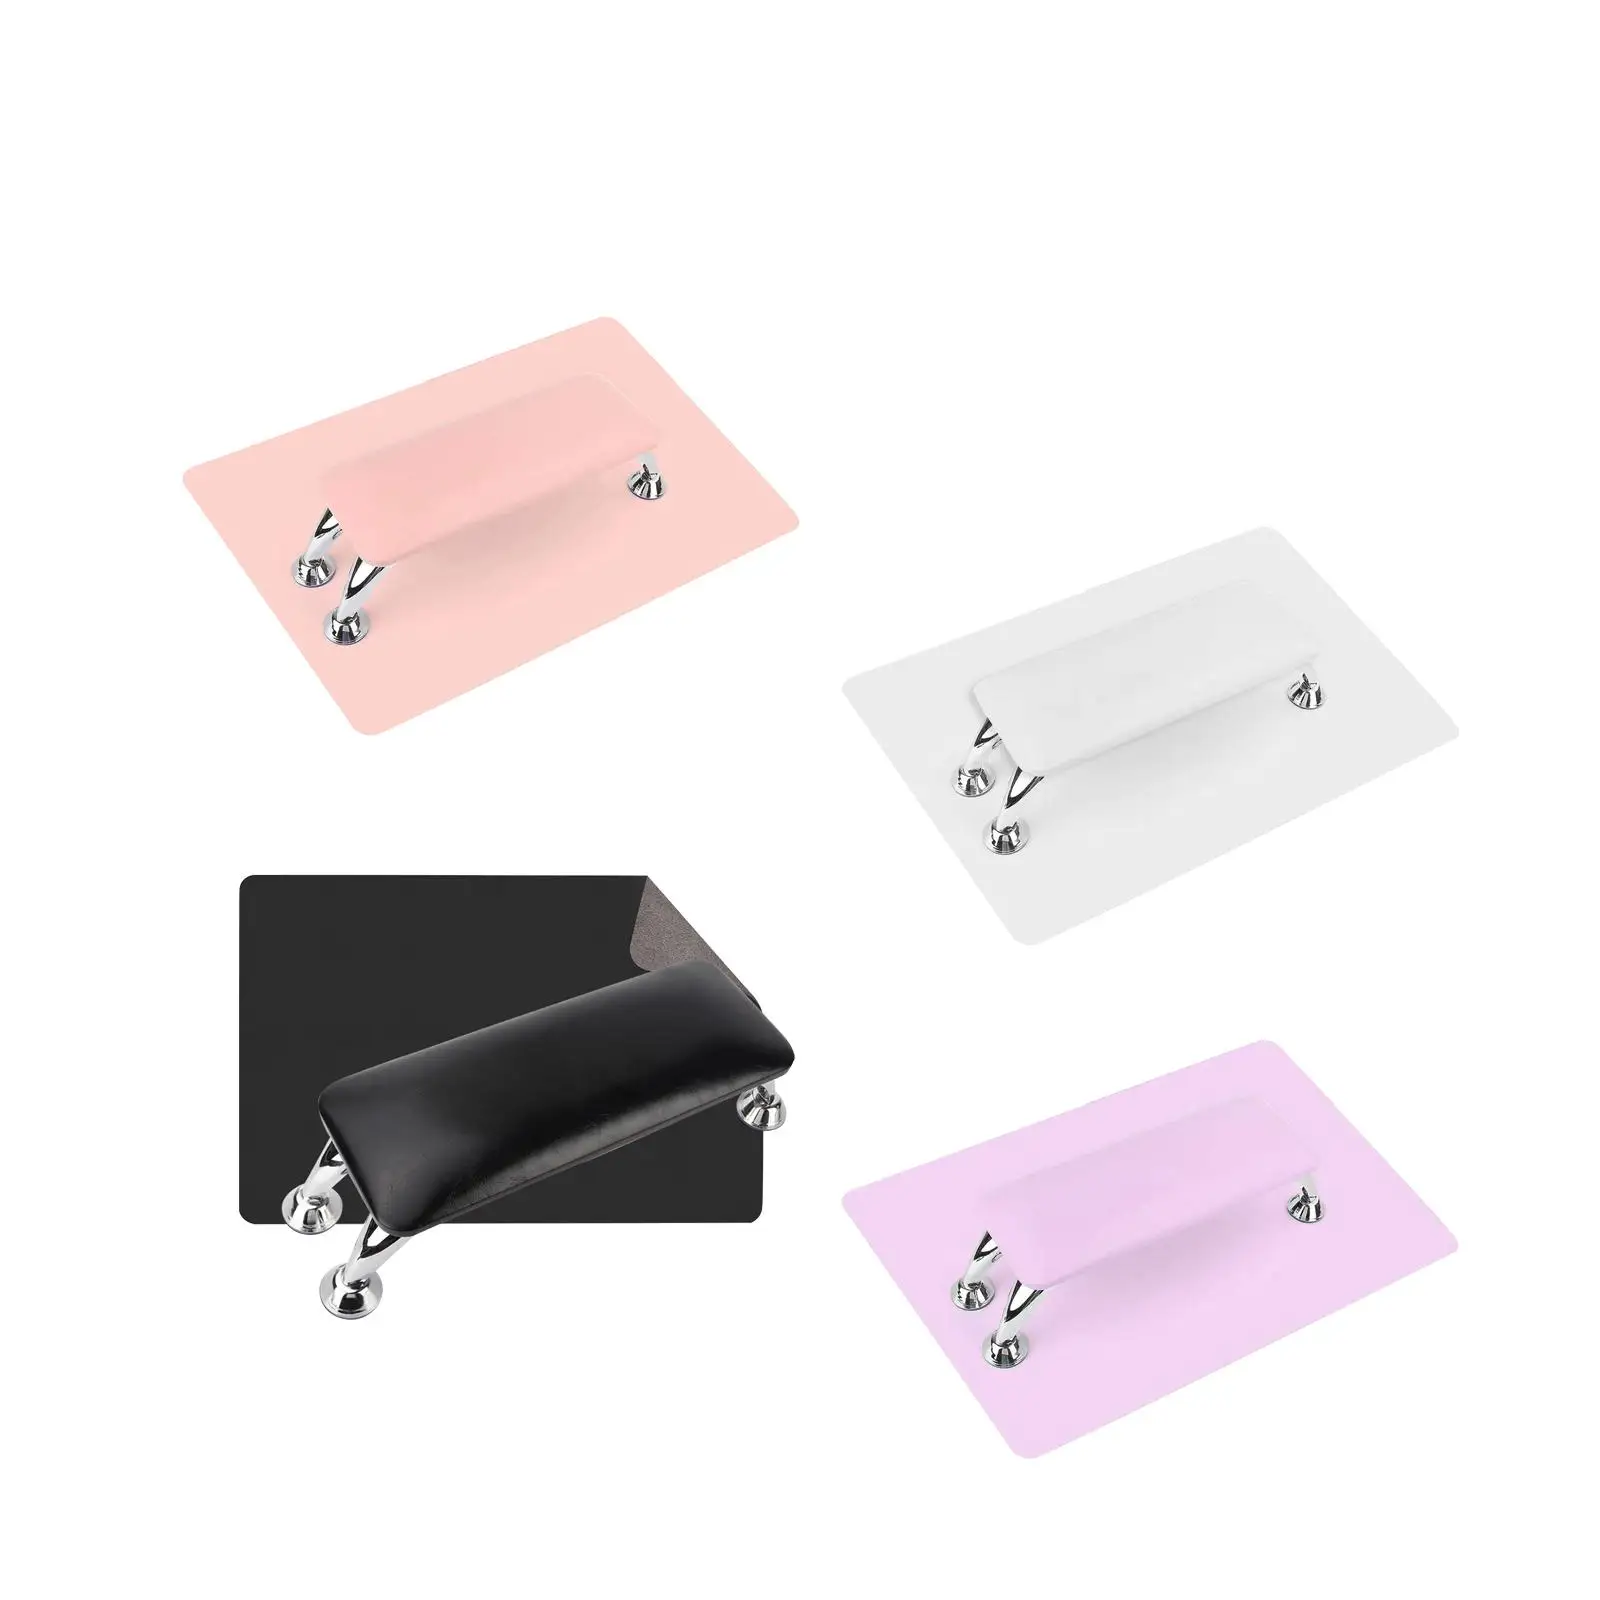 Professional Nail Rest Cushion Table Desk Station with Pad Waterproof PU Leather Manicure Hand Pillow for Manicure Home Nail Art